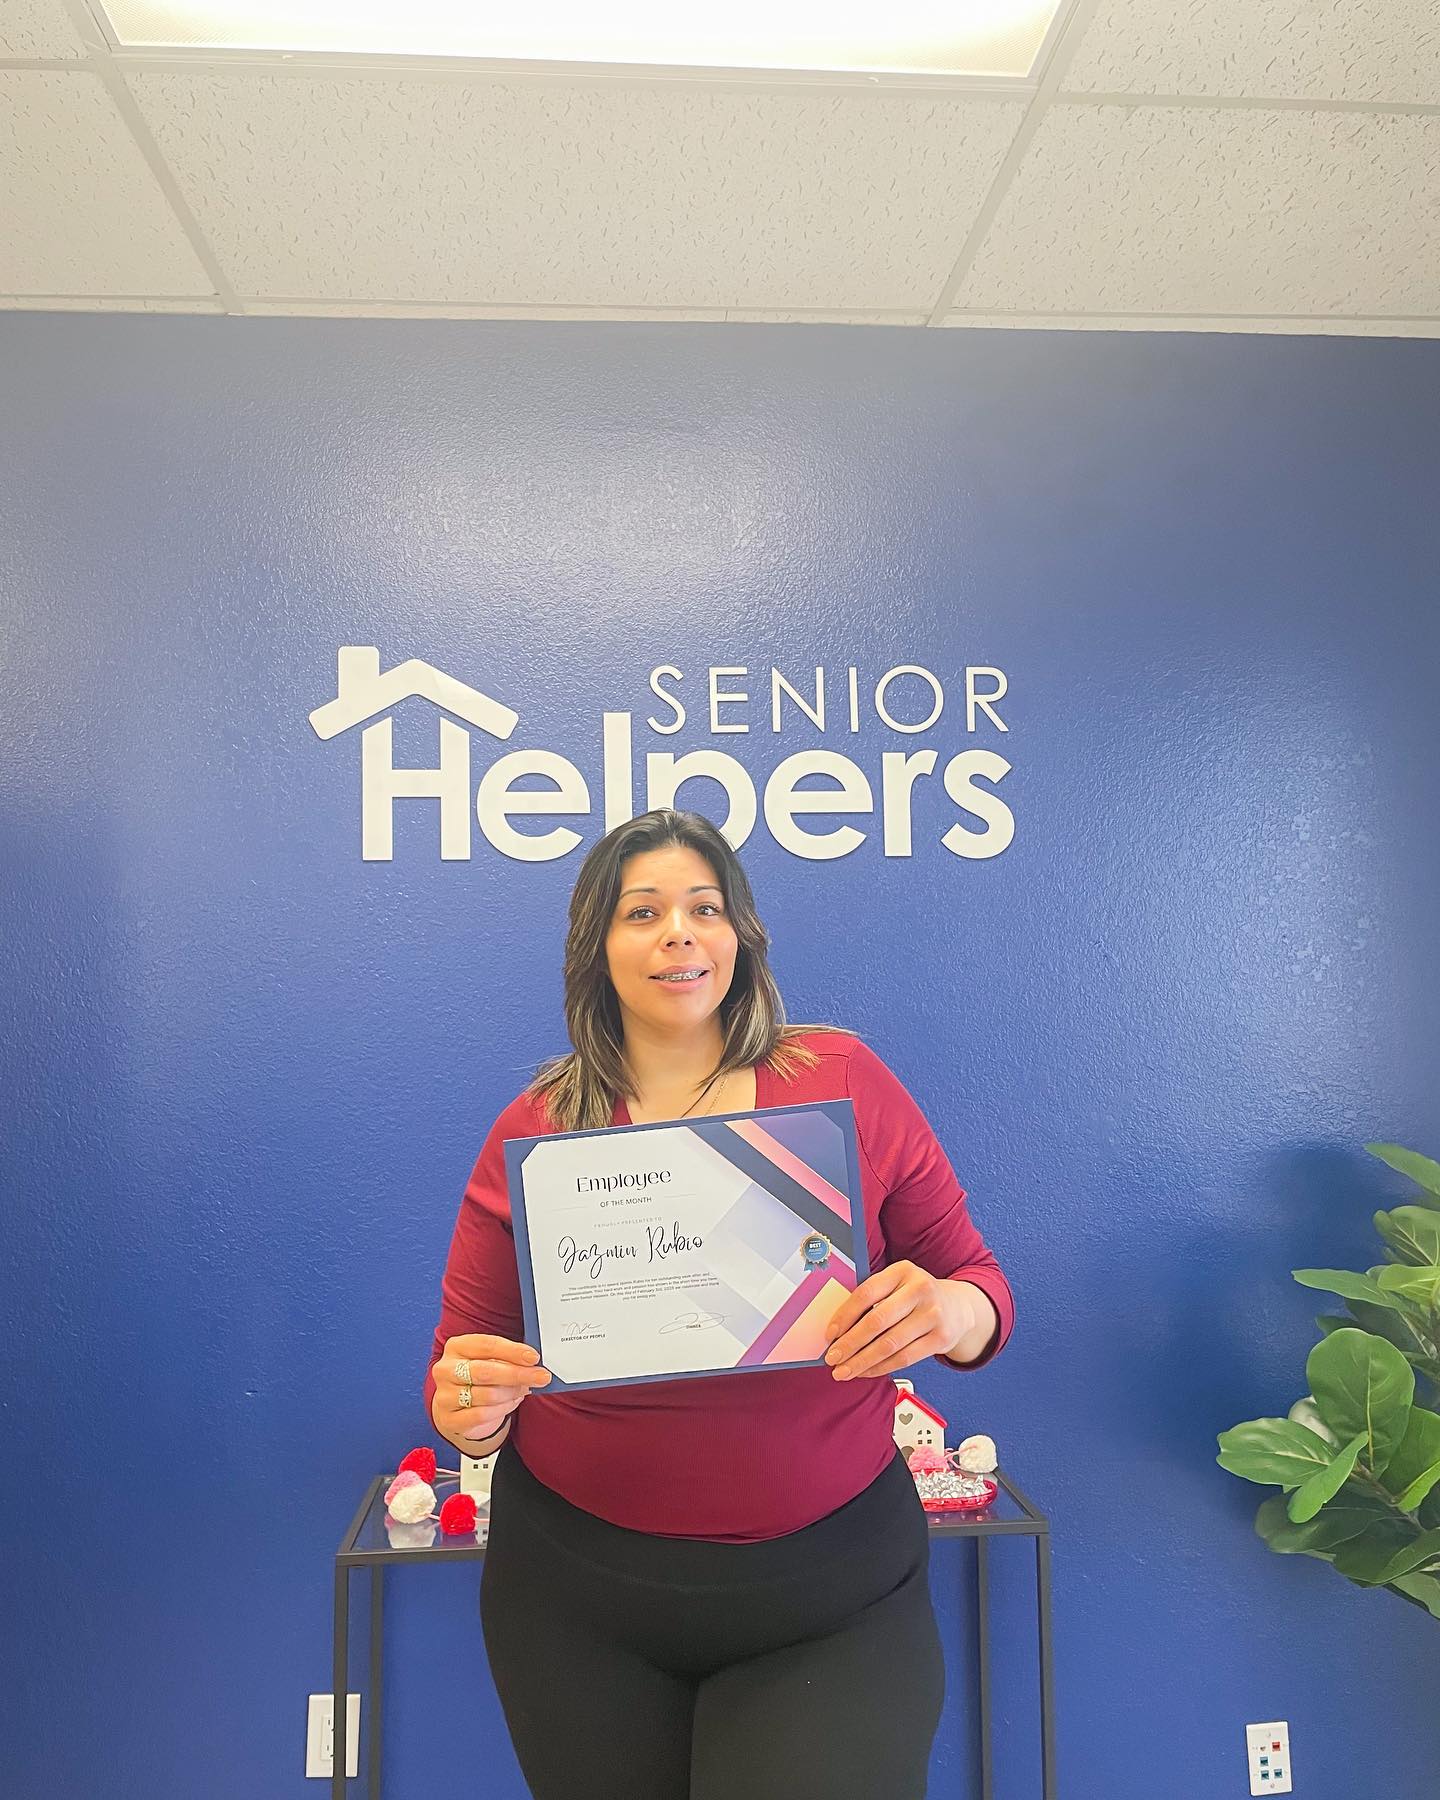 Congratulations to our Employee of the Month Jazmin! Thank you for your contagious outgoing personality. Our clients really enjoy your presence and compassionate care